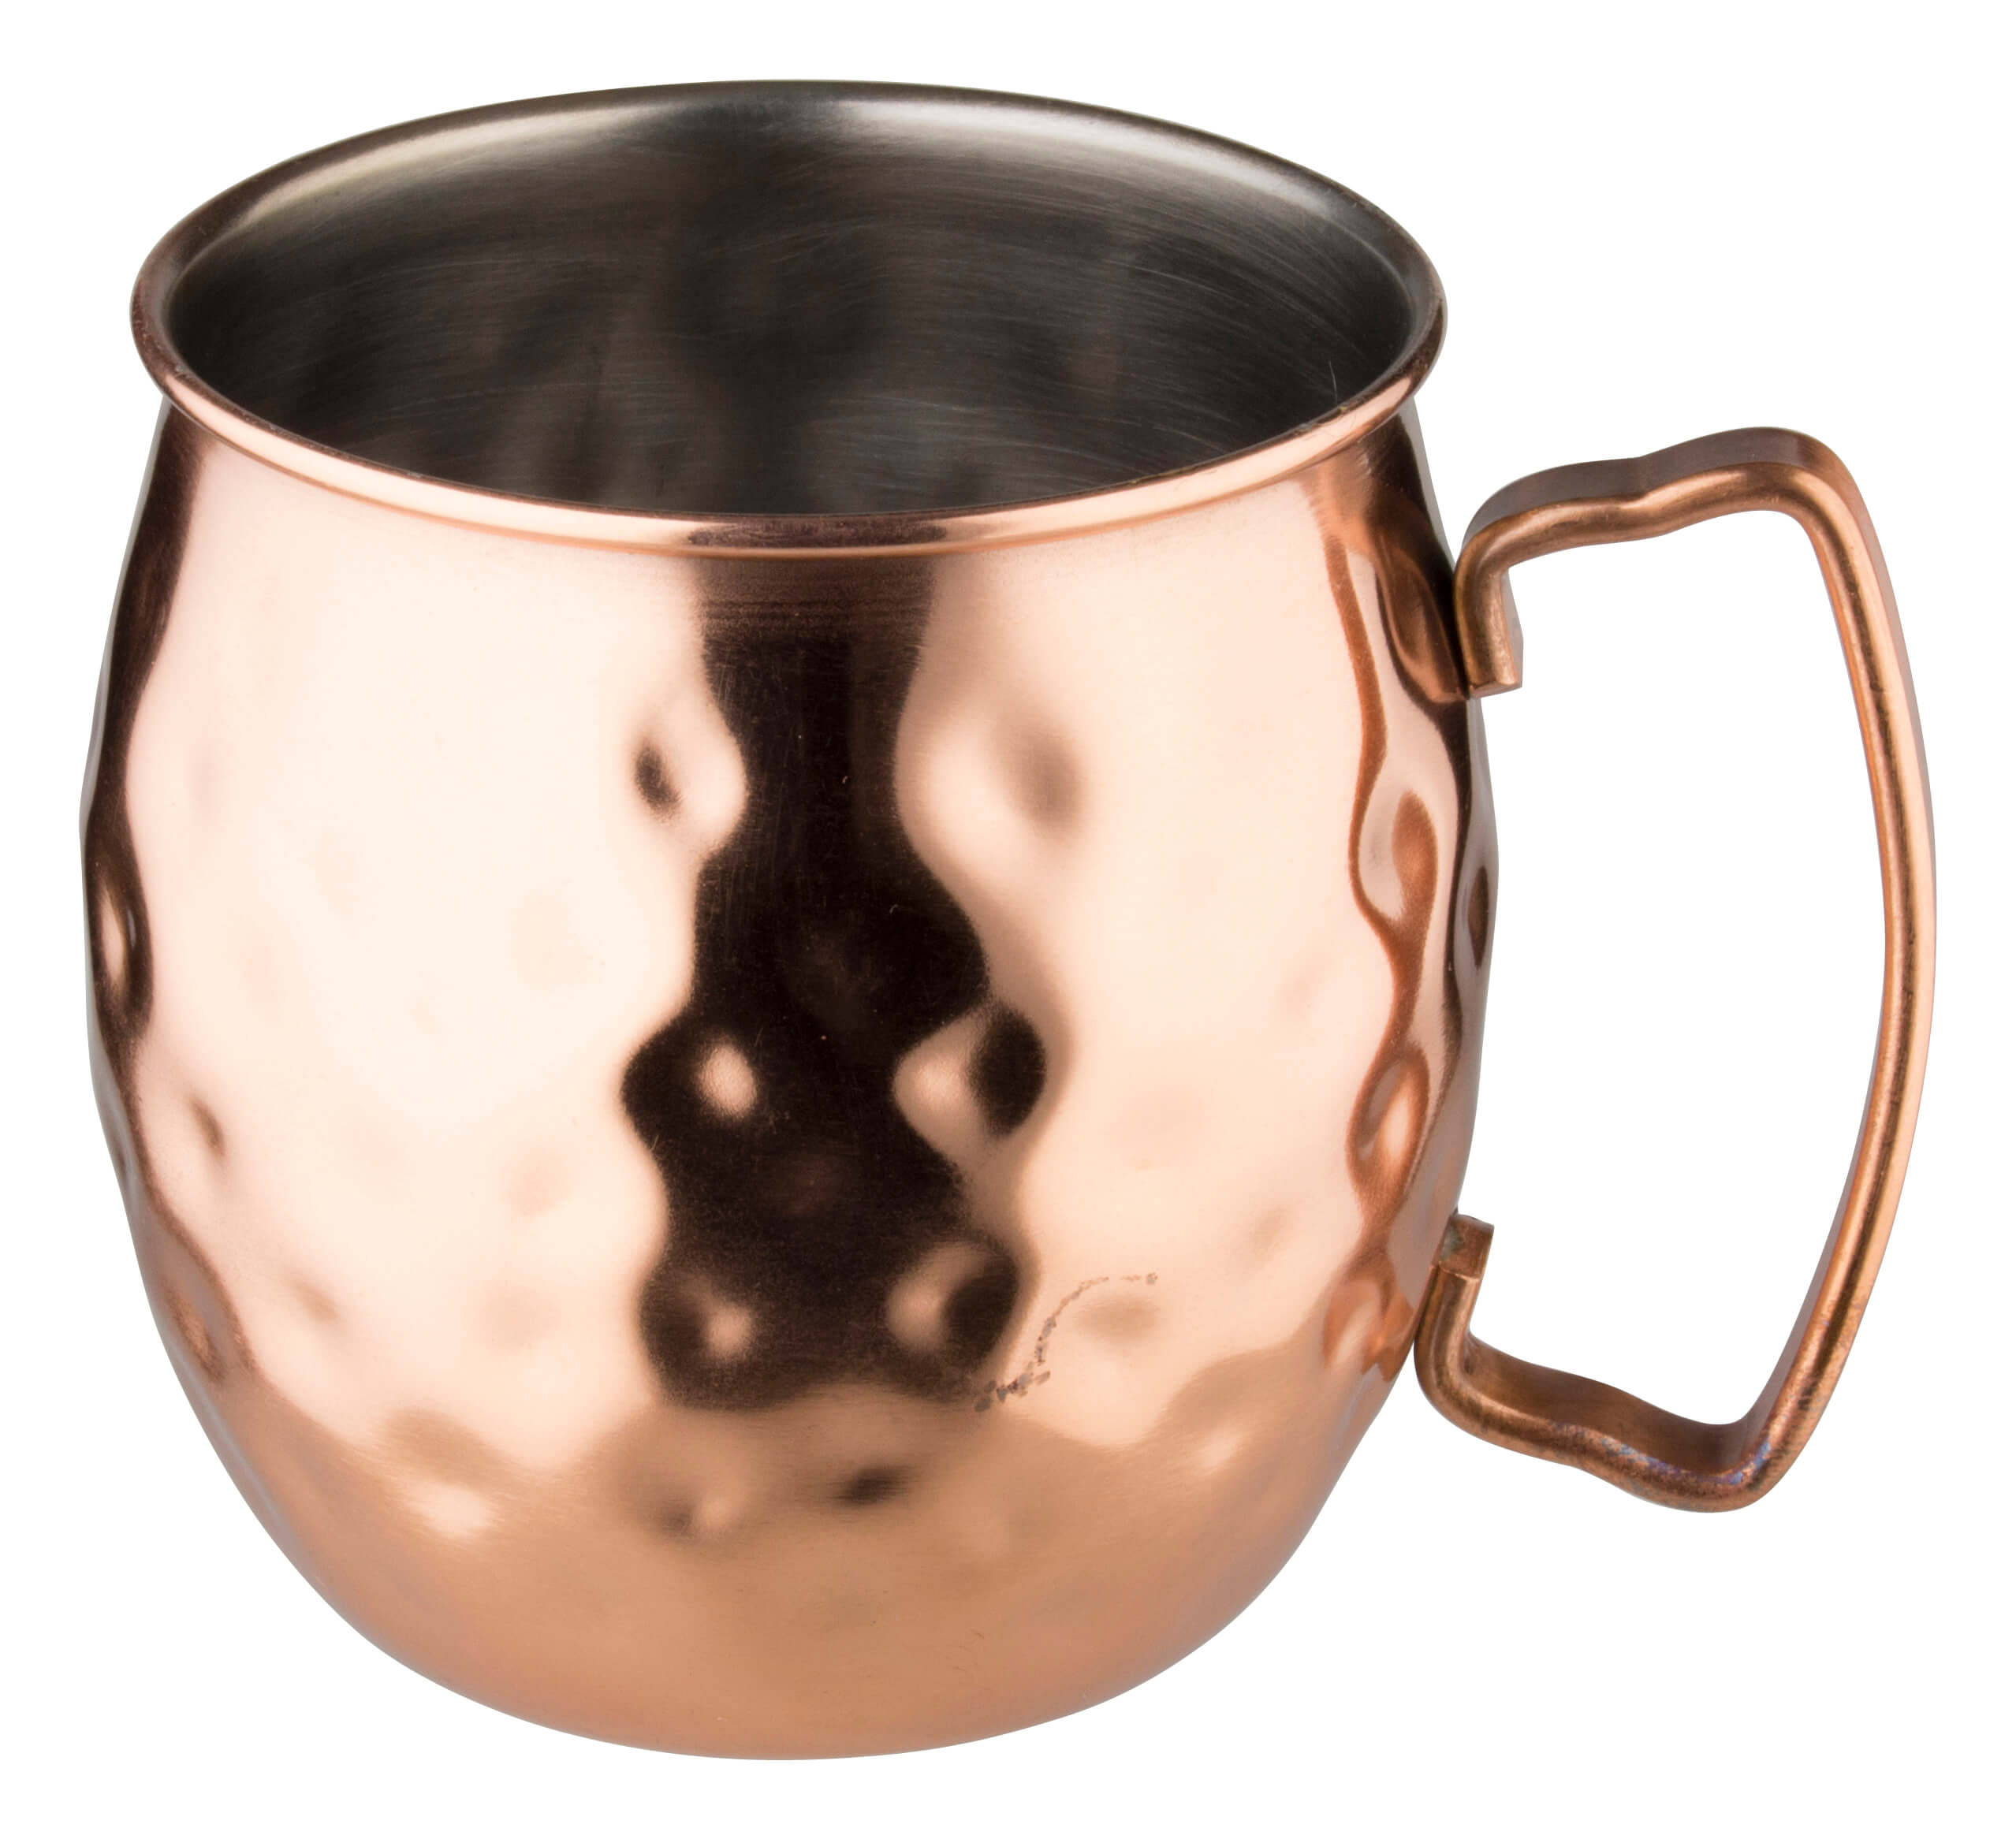 Stainless steel mug Moscow Mule, copper colored, hammered, Prime Bar - 400ml